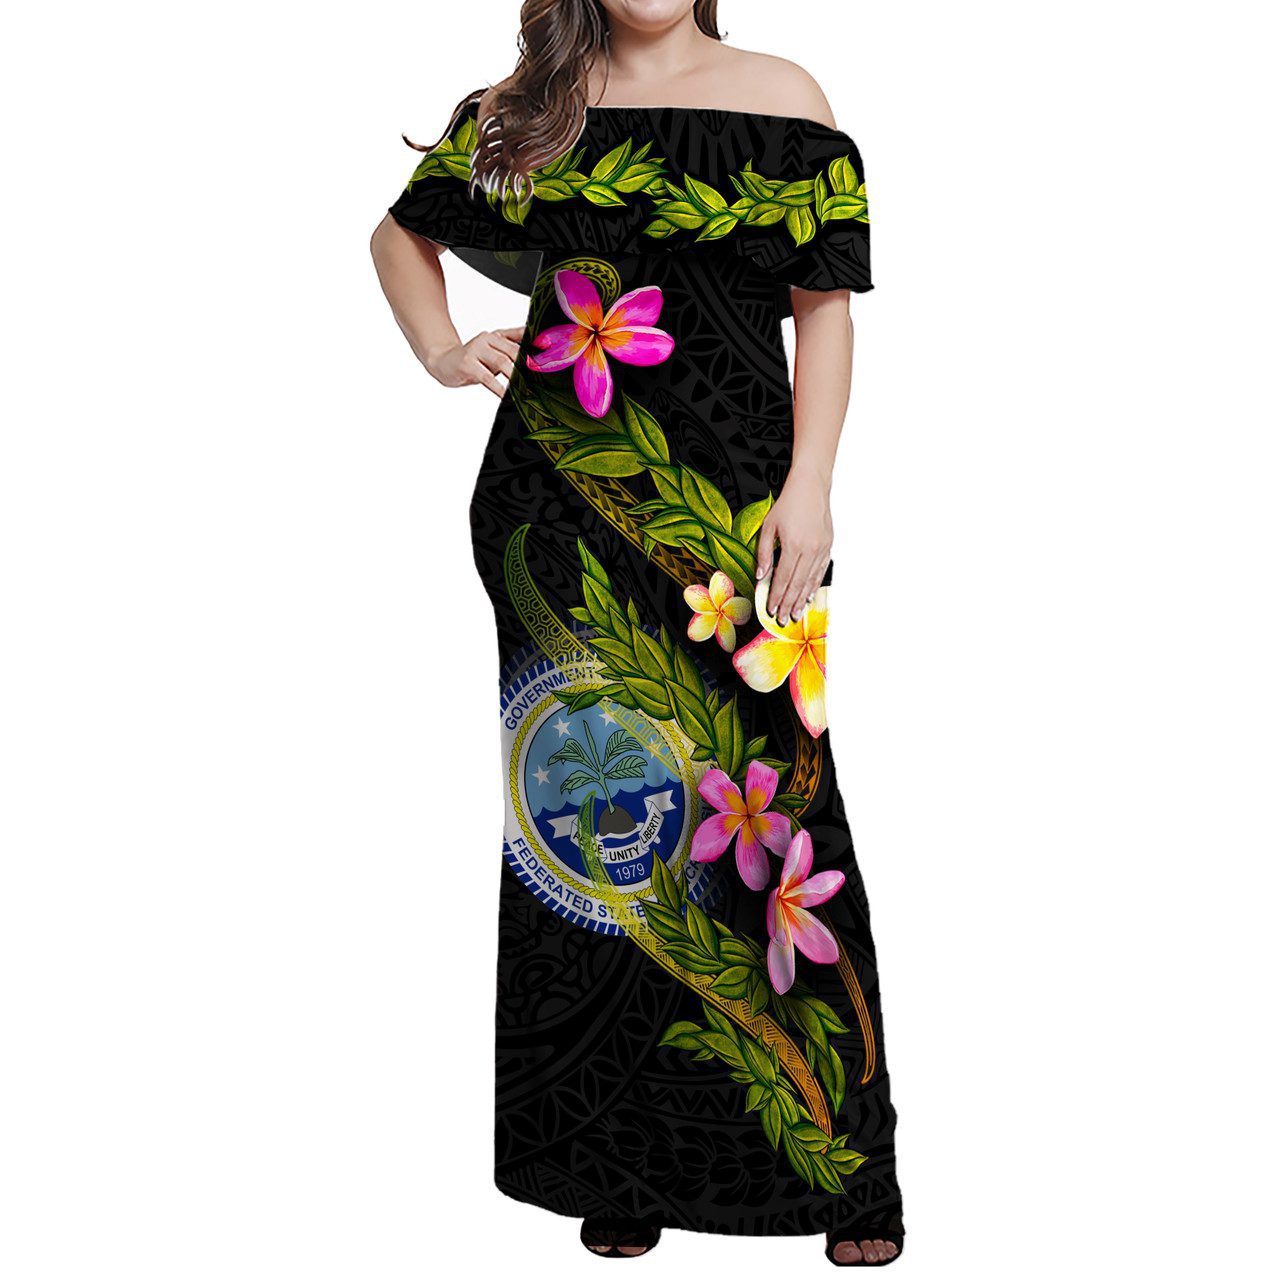 Federated States of Micronesia Women Off Shoulder Long Dress – Plumeria Tribal